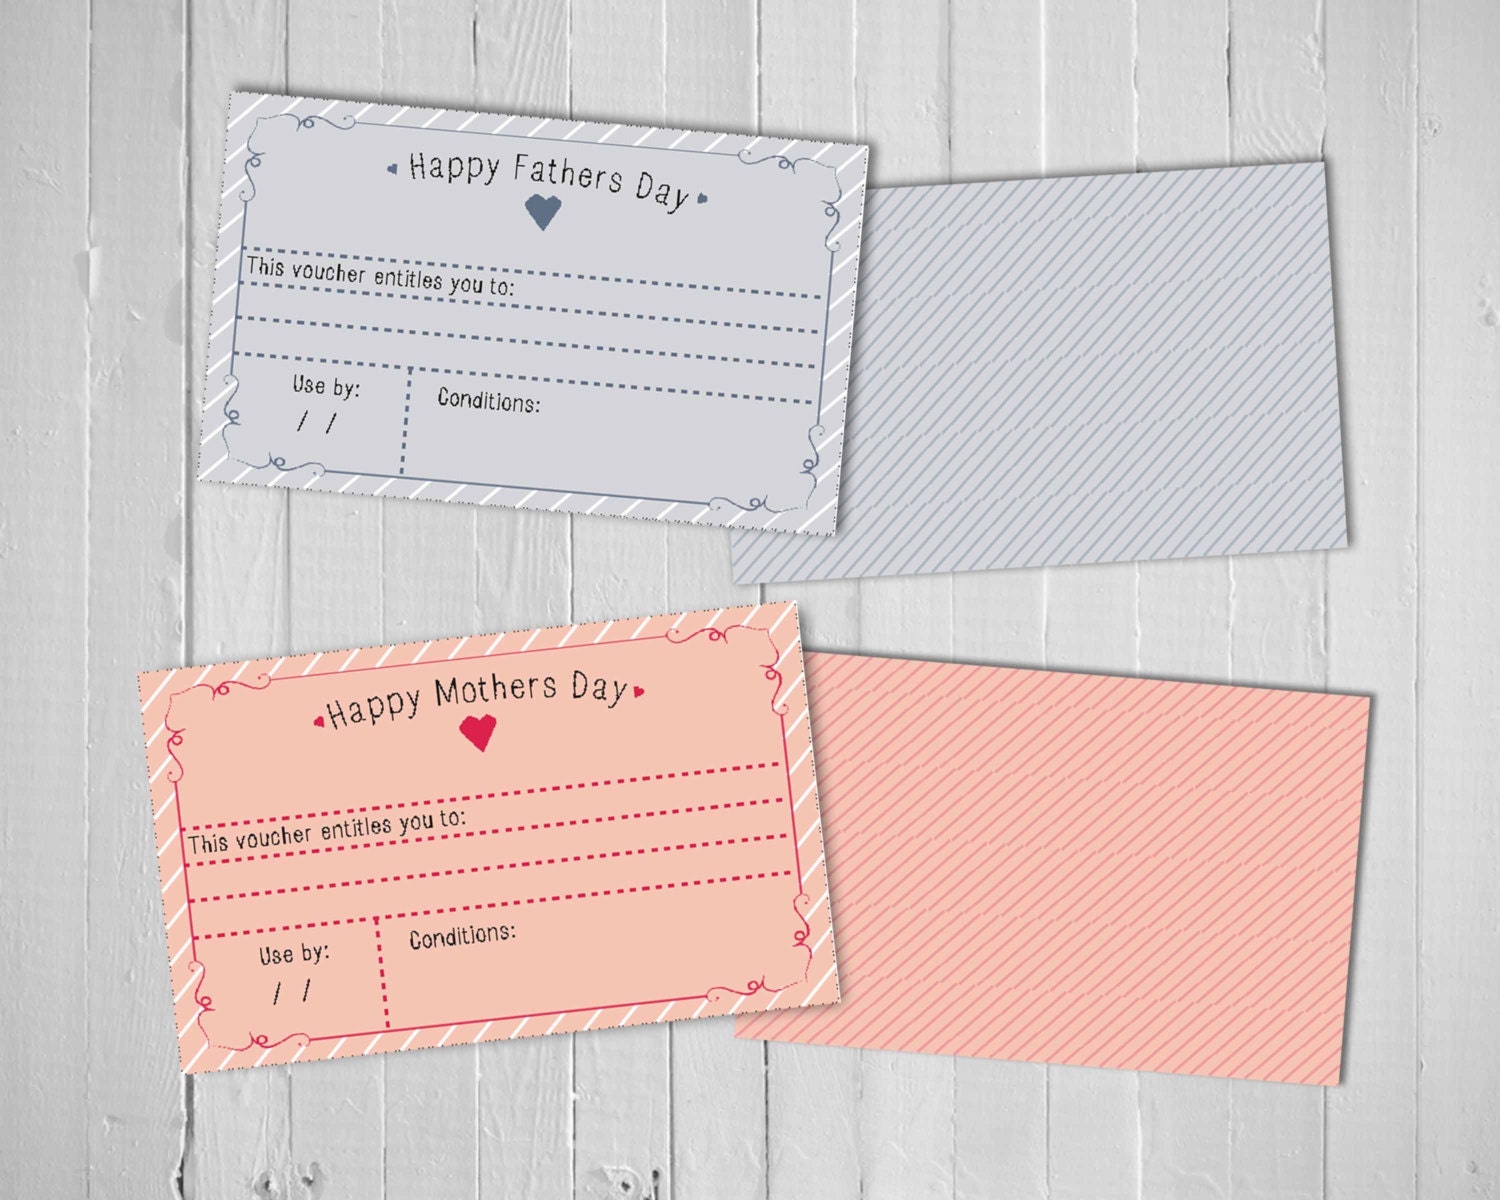 printable-vouchers-fathers-day-vouchers-gift-for-dad